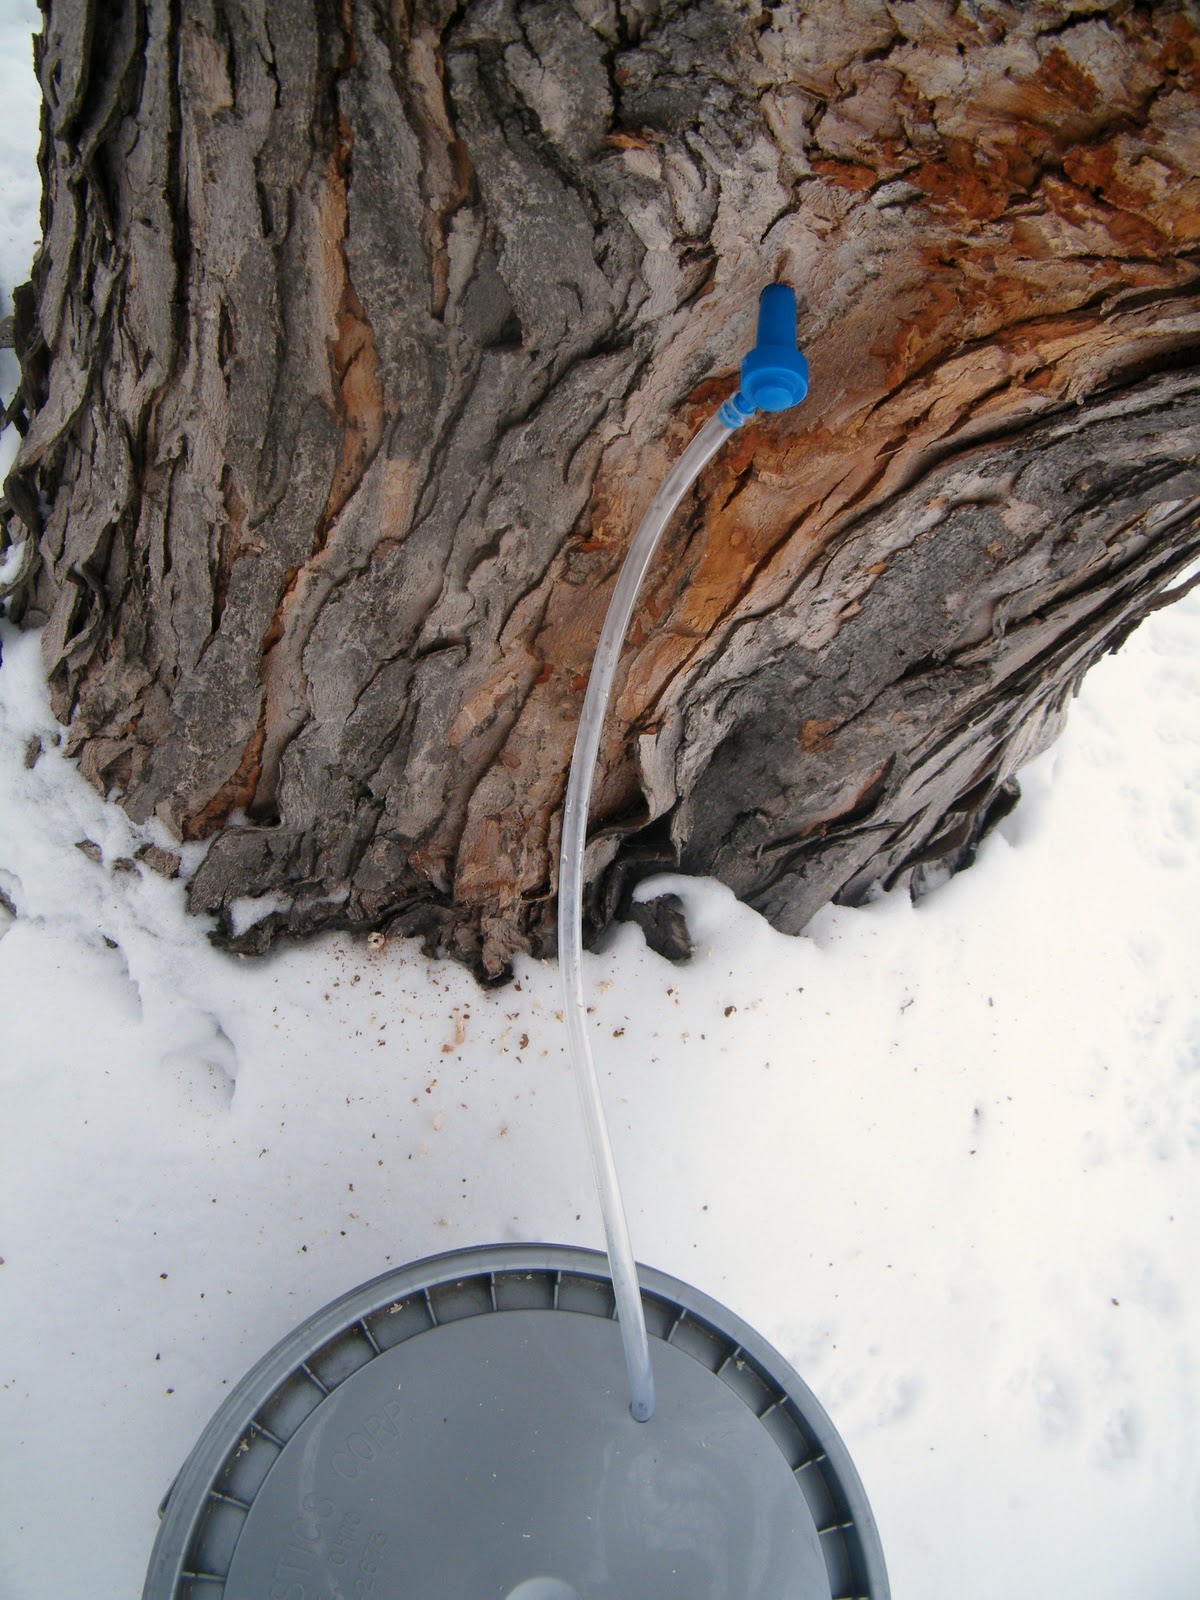 How To Make Maple Syrup in Your Own Backyard Part 1:Tapping a Tree